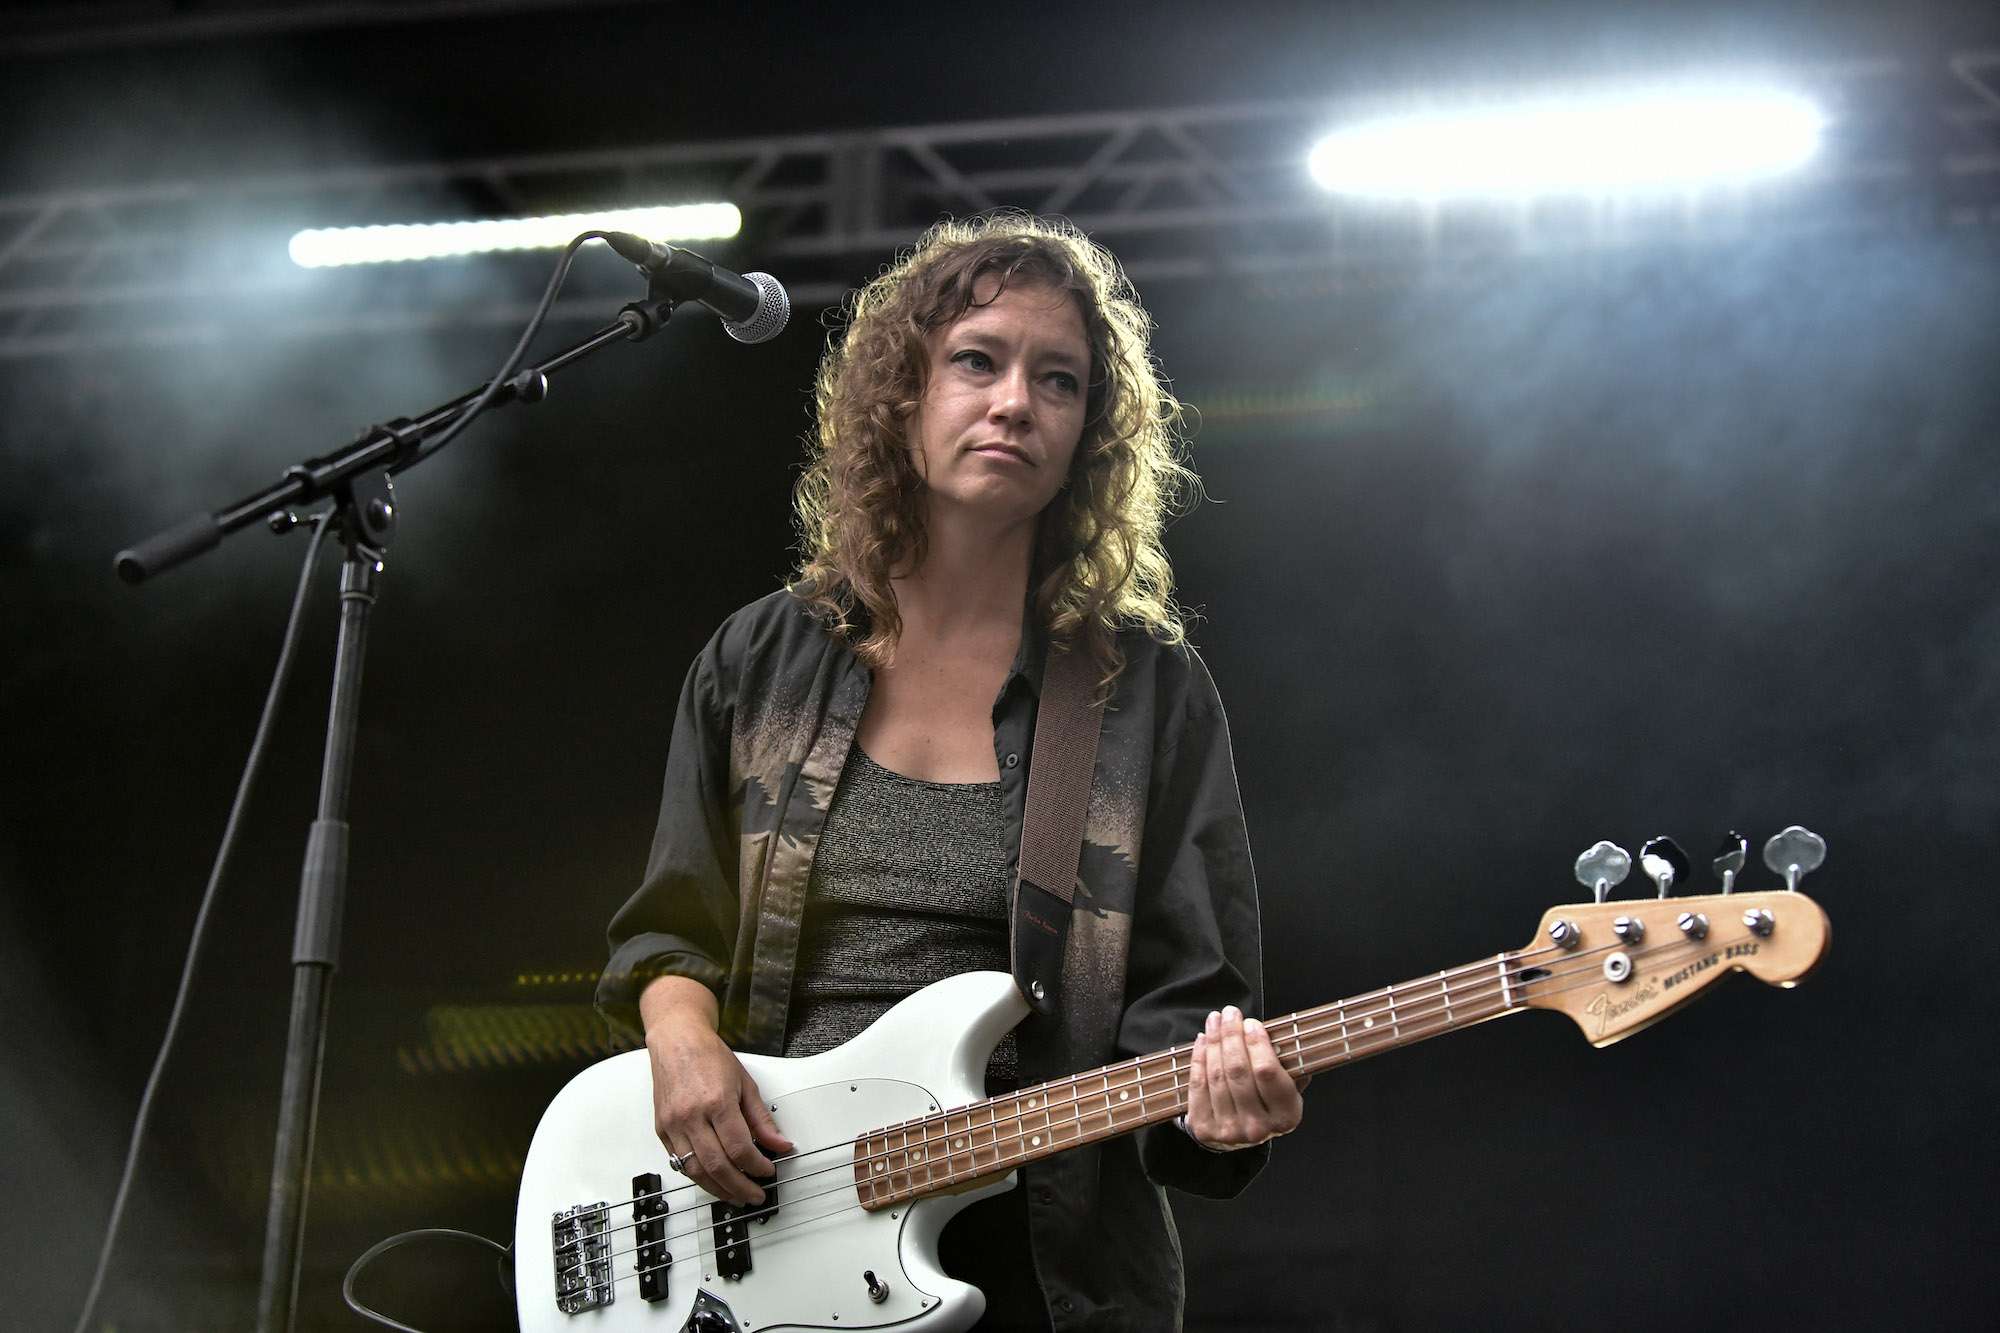 Low Live At Pitchfork [GALLERY] 2